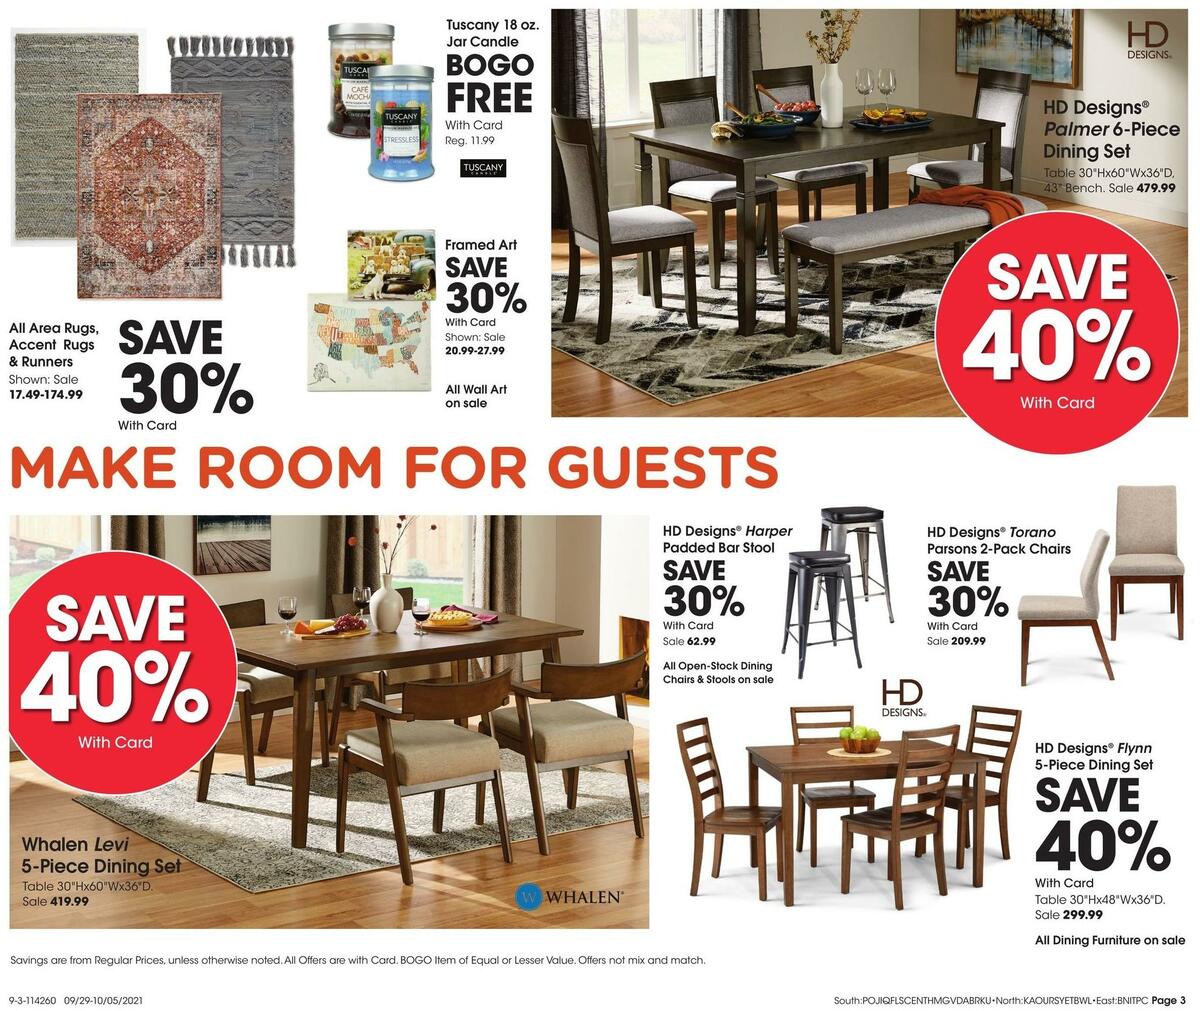 Fred Meyer General Merchandise Weekly Ad from September 29